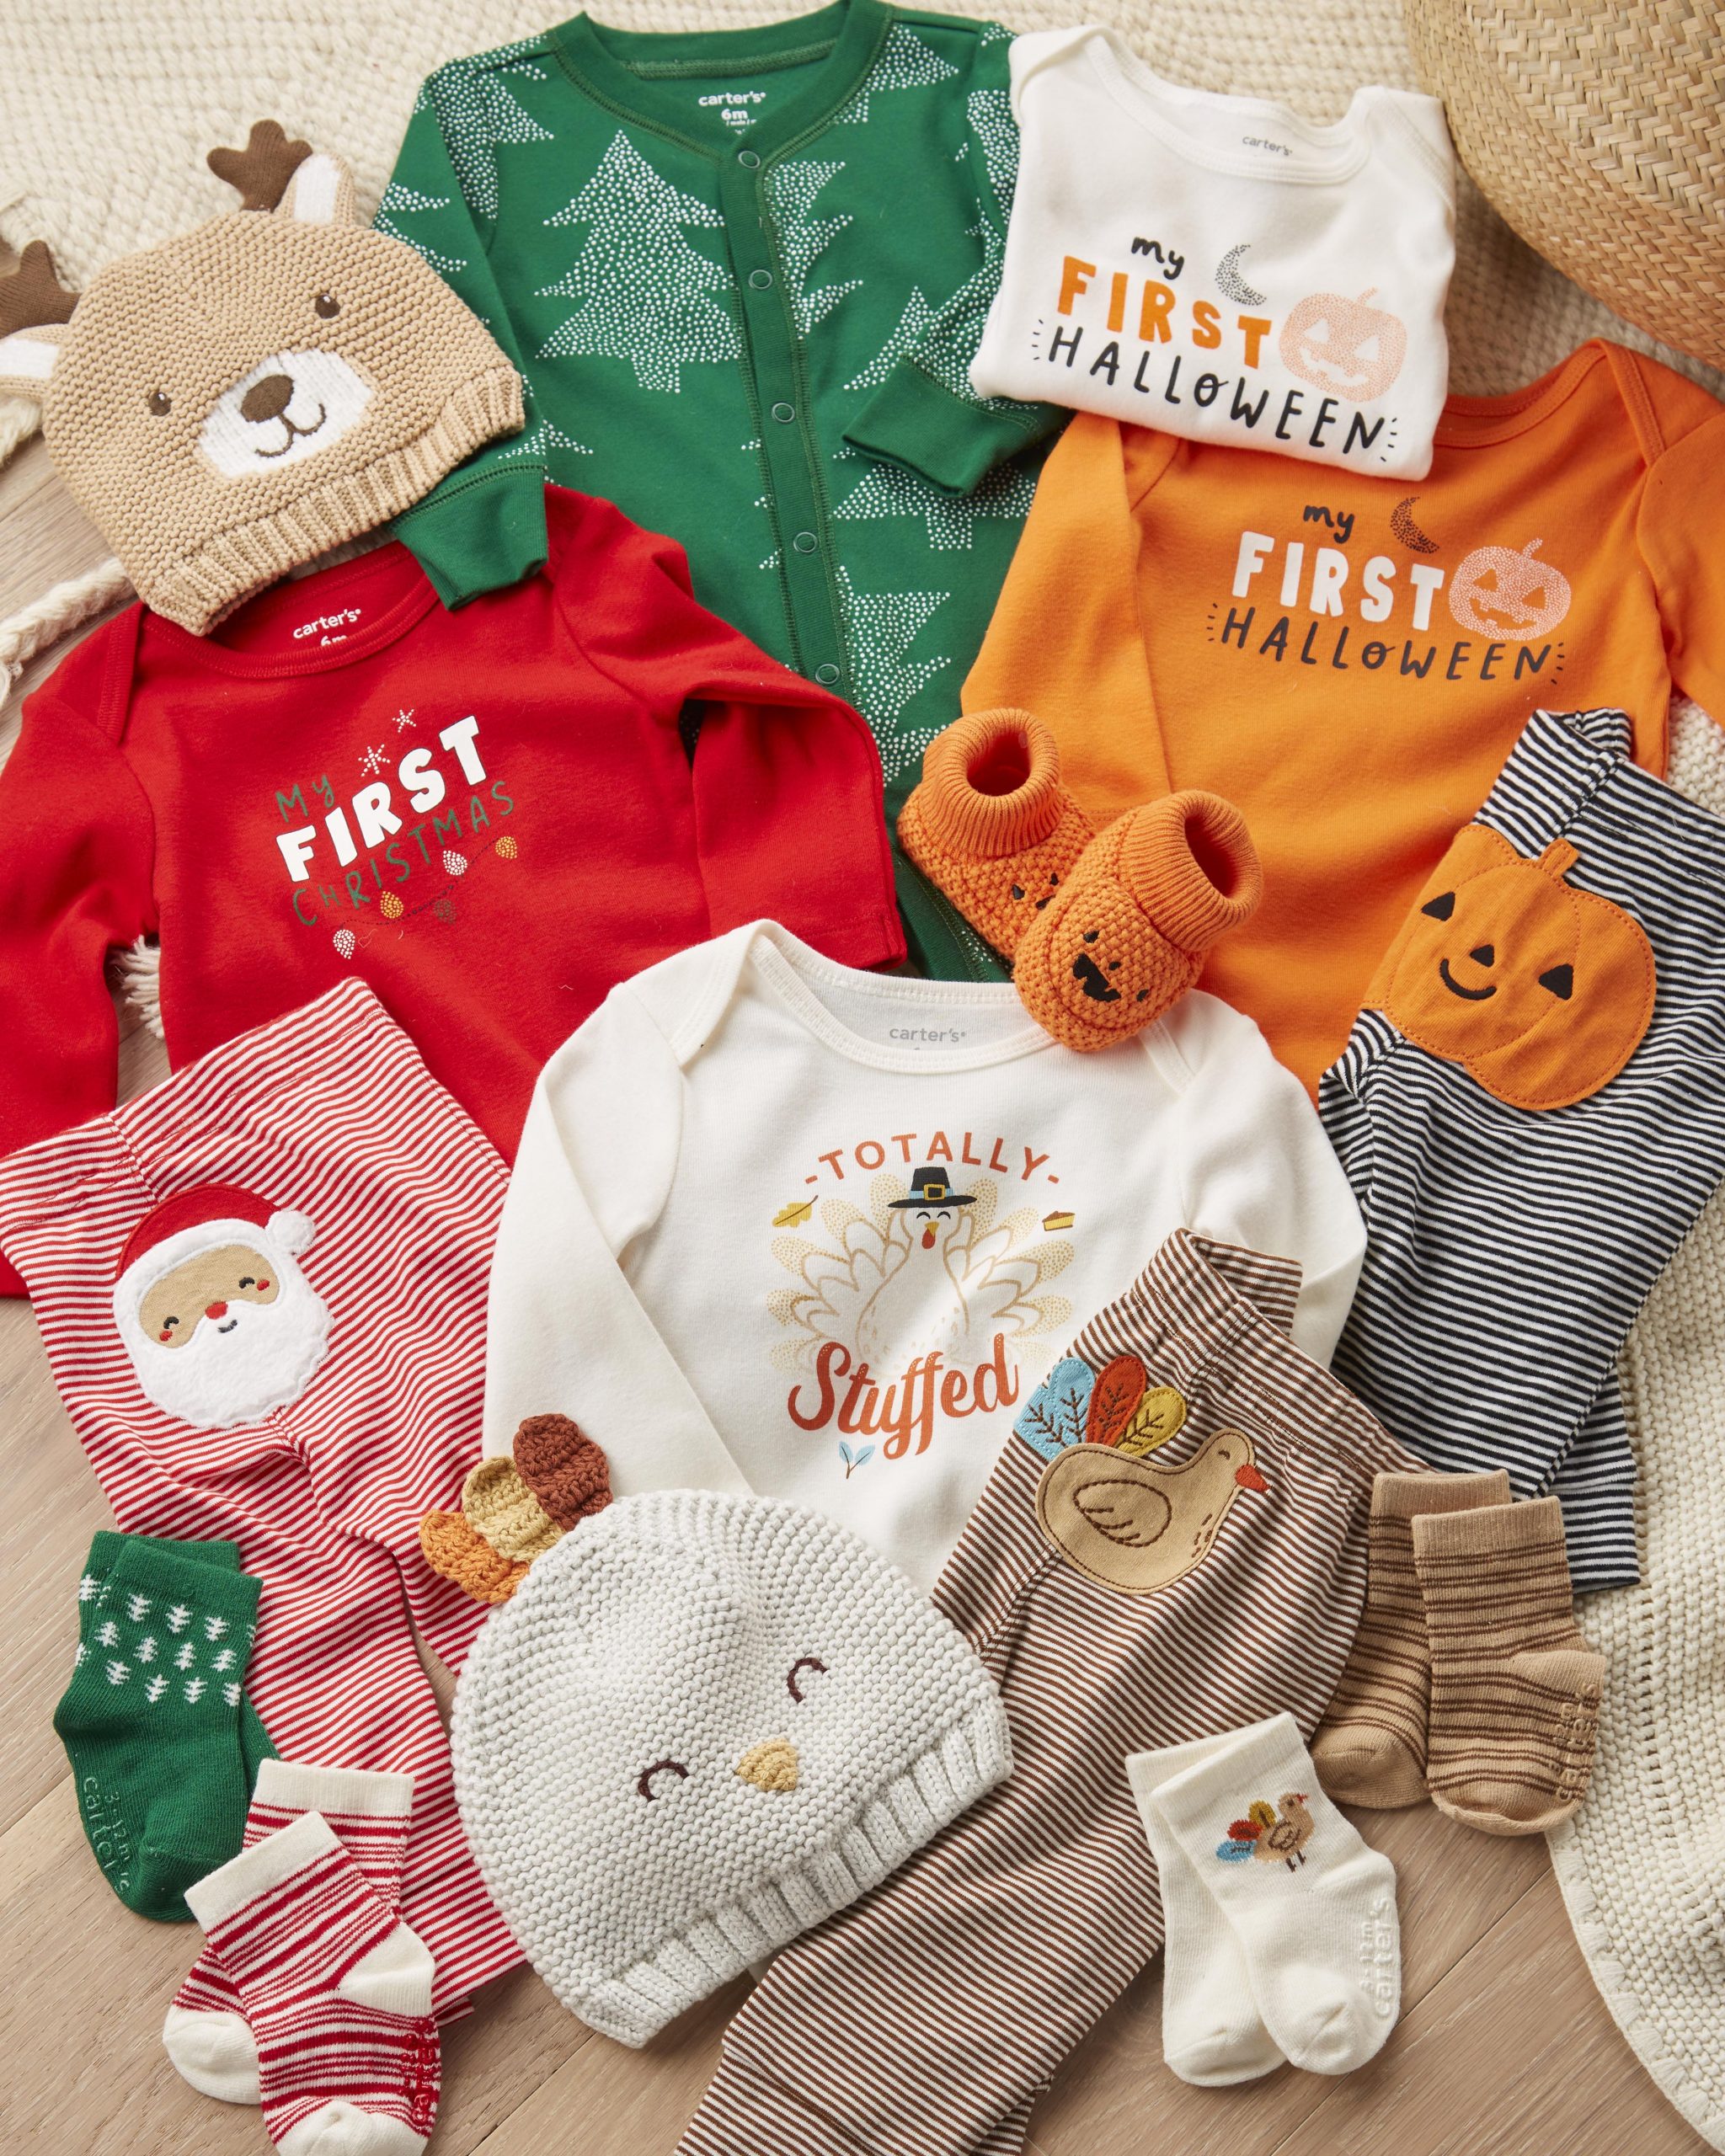 Baby Clothes Brands